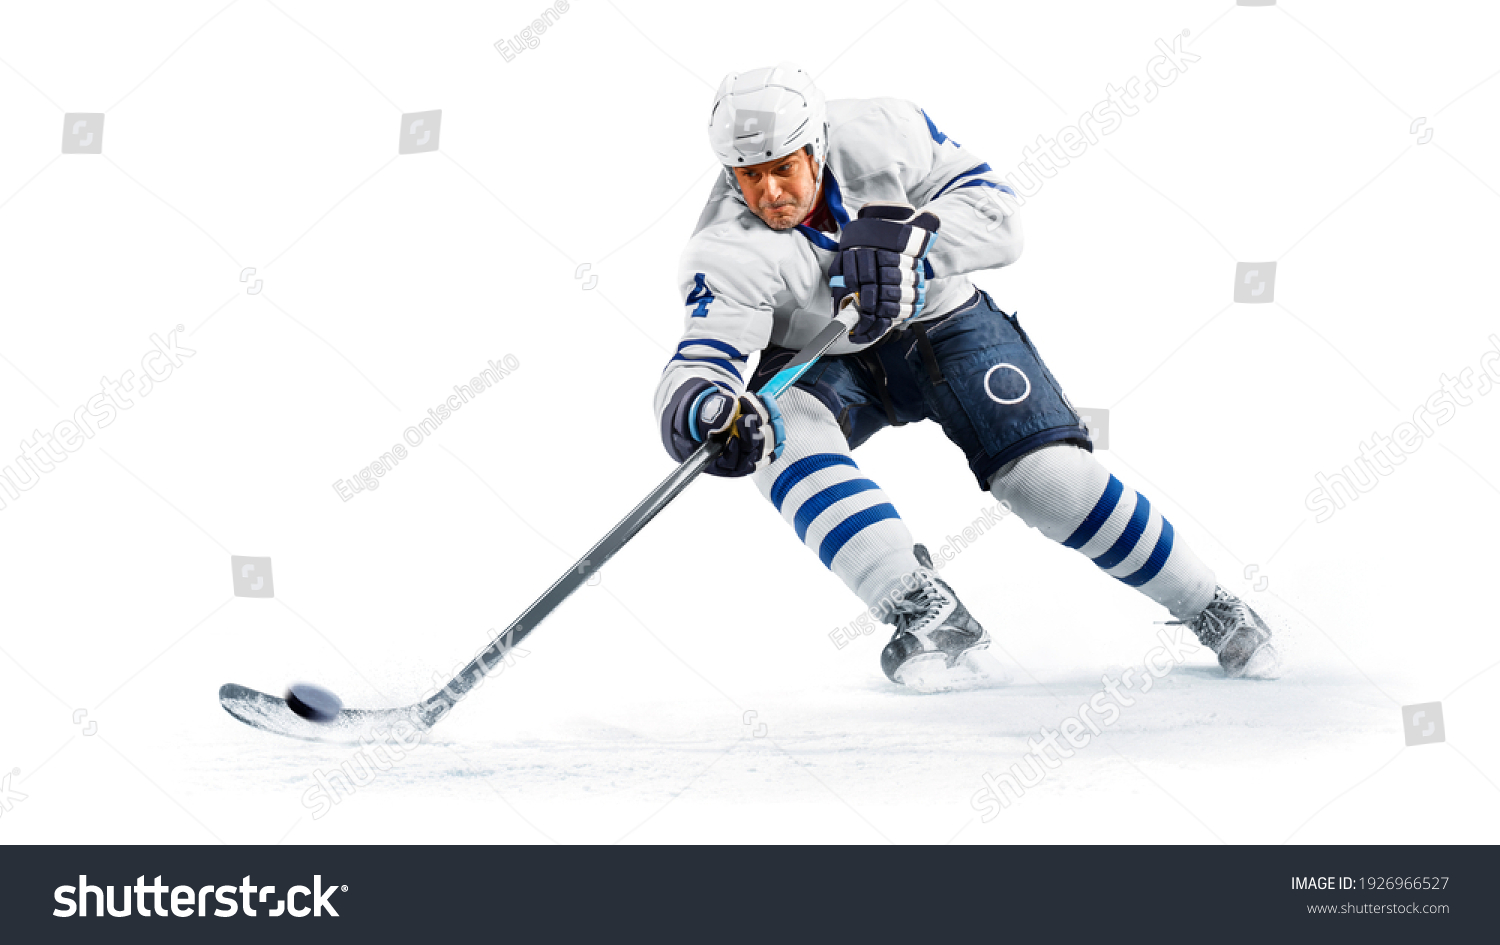 Portrait of energetic player playing hockey on ice #1926966527